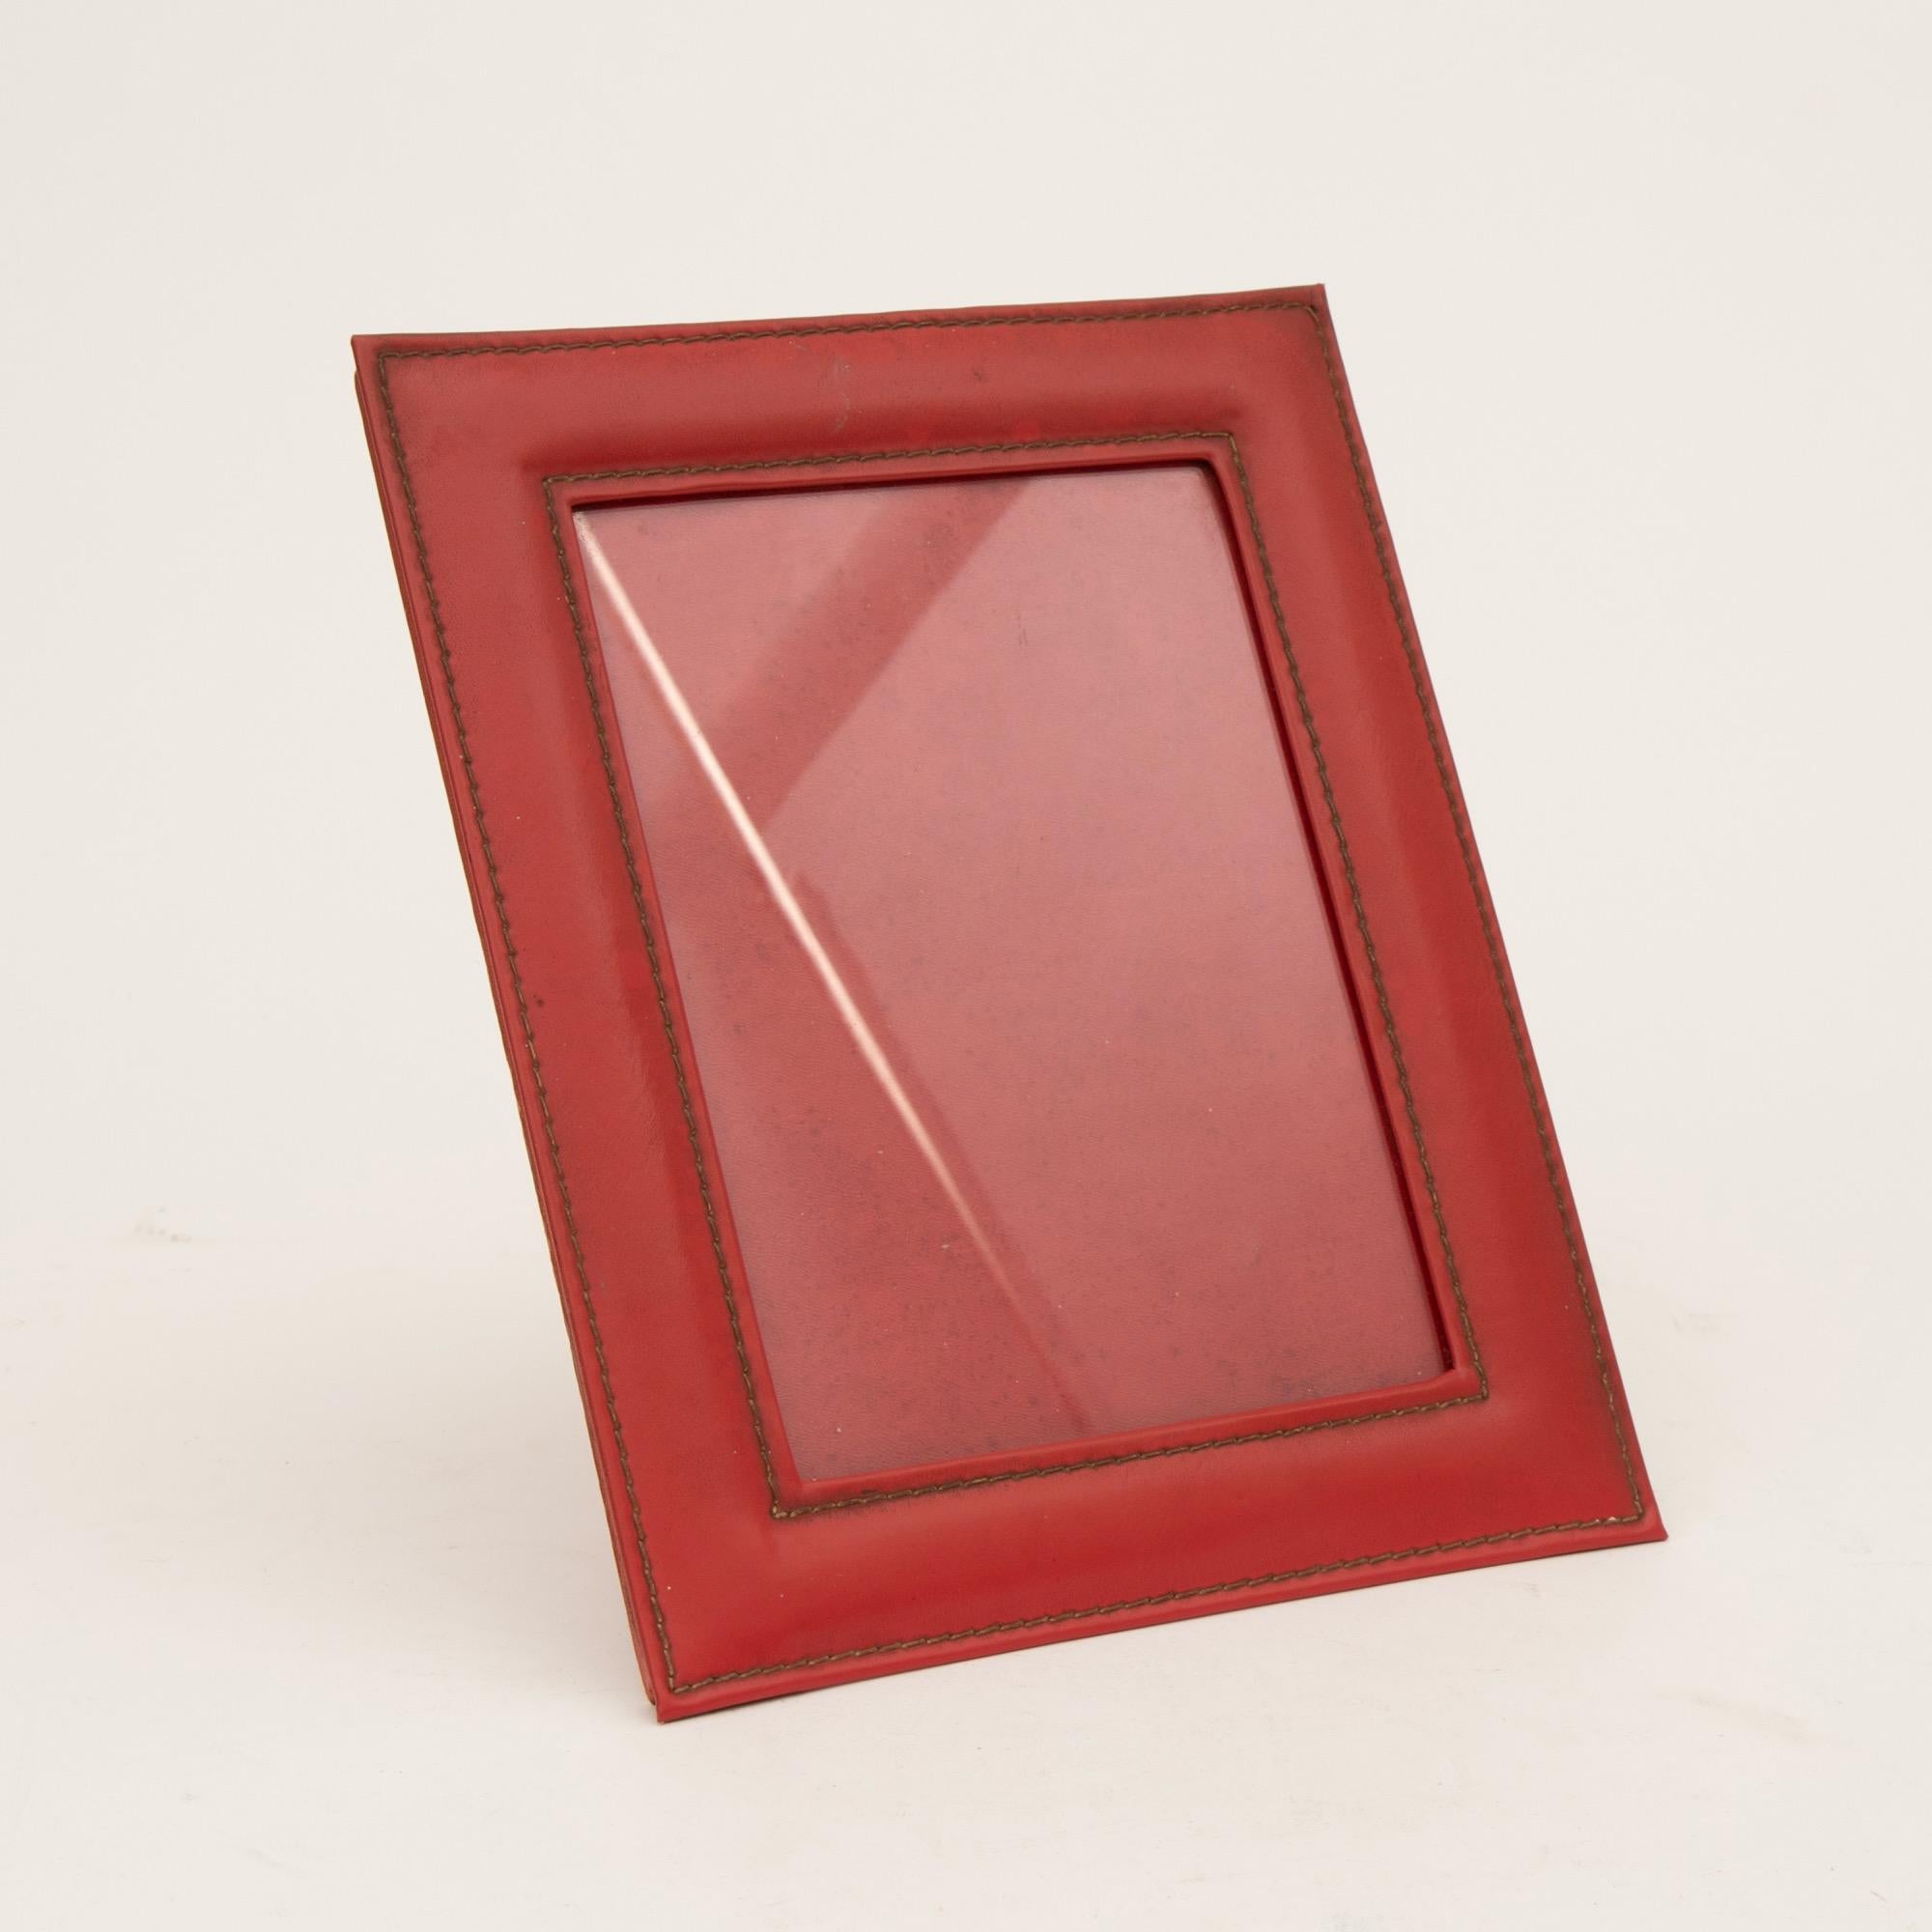 French Art Deco photo frame in an Italian red leather
beautifully stitched to form the cushion effect.
circa 1930
Measures: H 30.5cm W 24.5cm D 1.5cm.